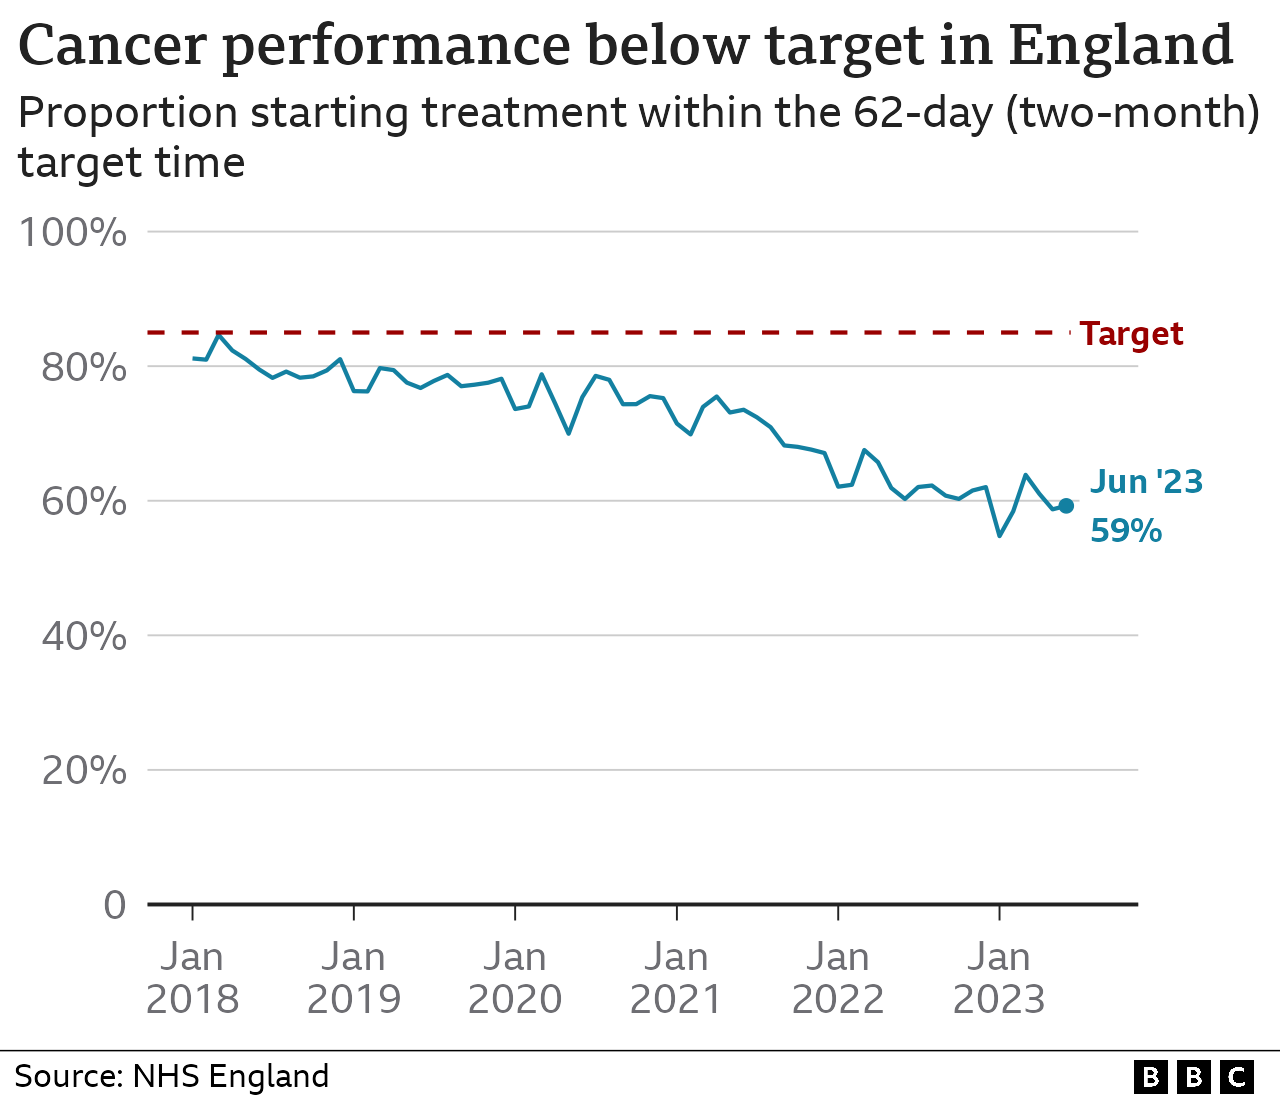 Two-month waiting times target performance in England